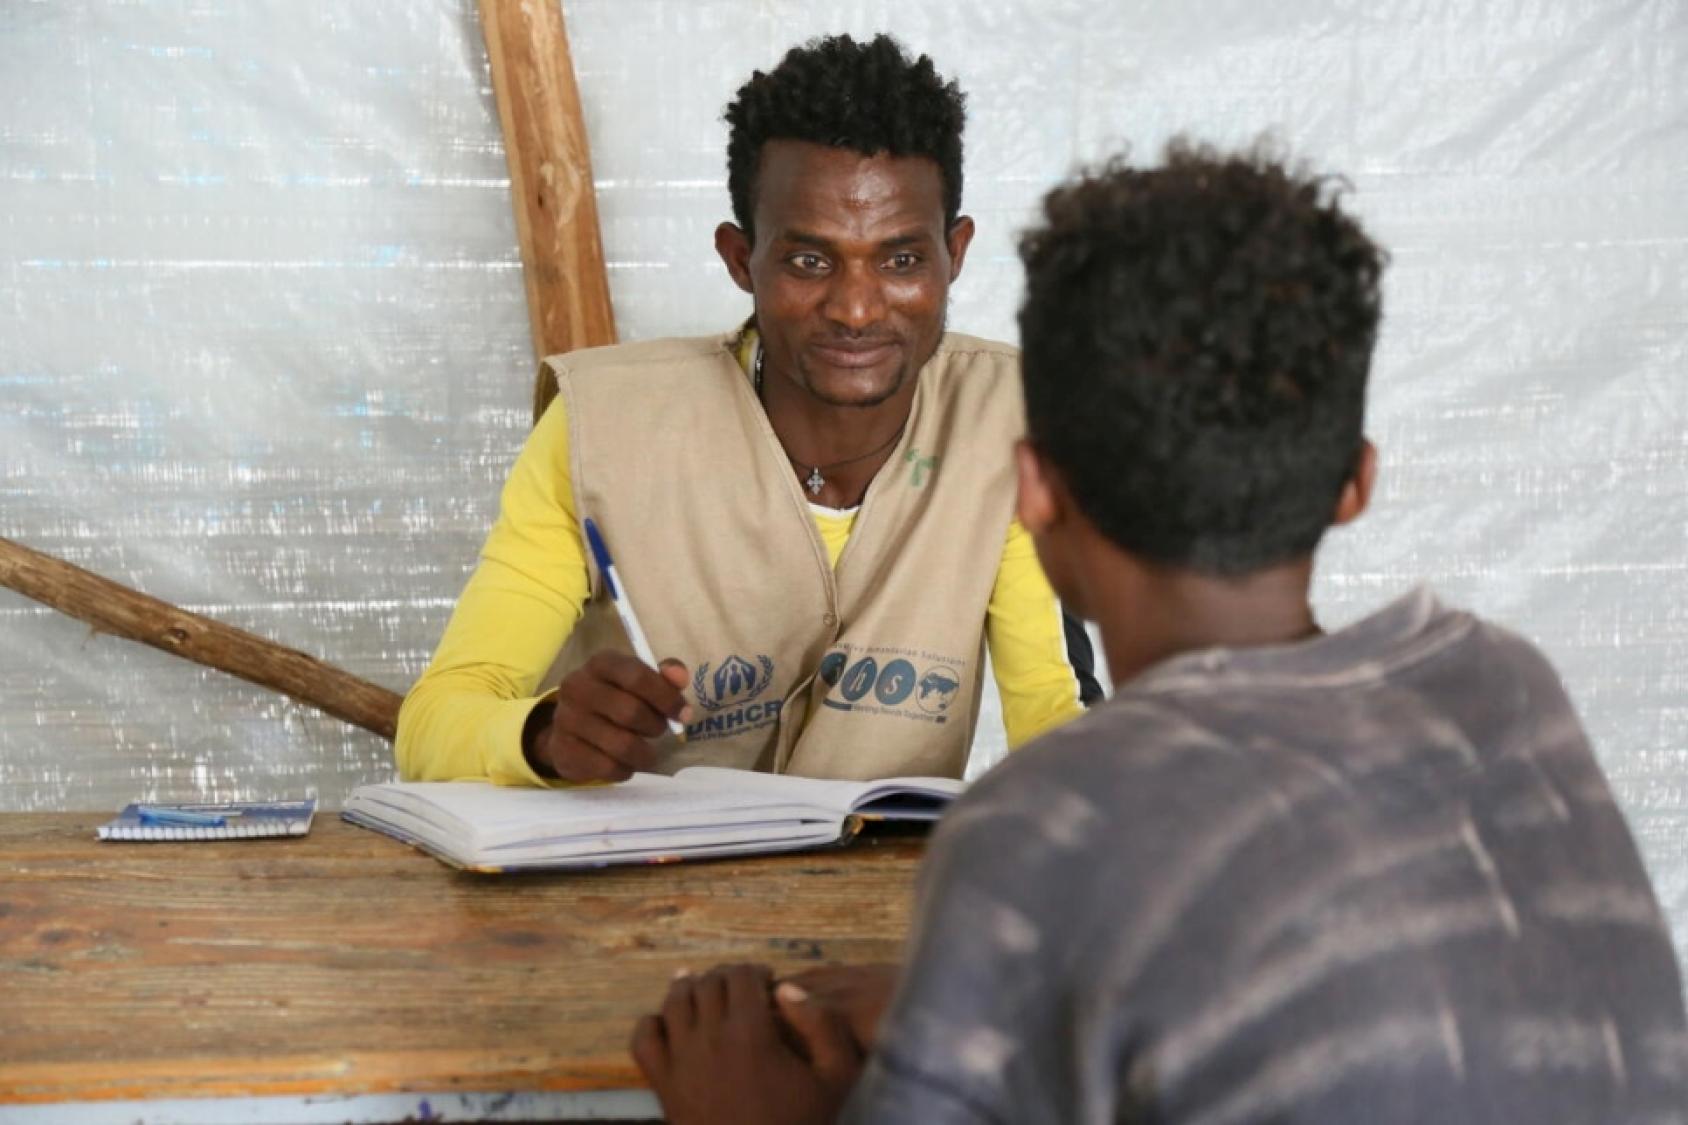 Teklit, 29, works as a social worker at a site in Mekelle, Tigray region, hosting thousands of Ethiopians displaced by the conflict in the northern part of the country.